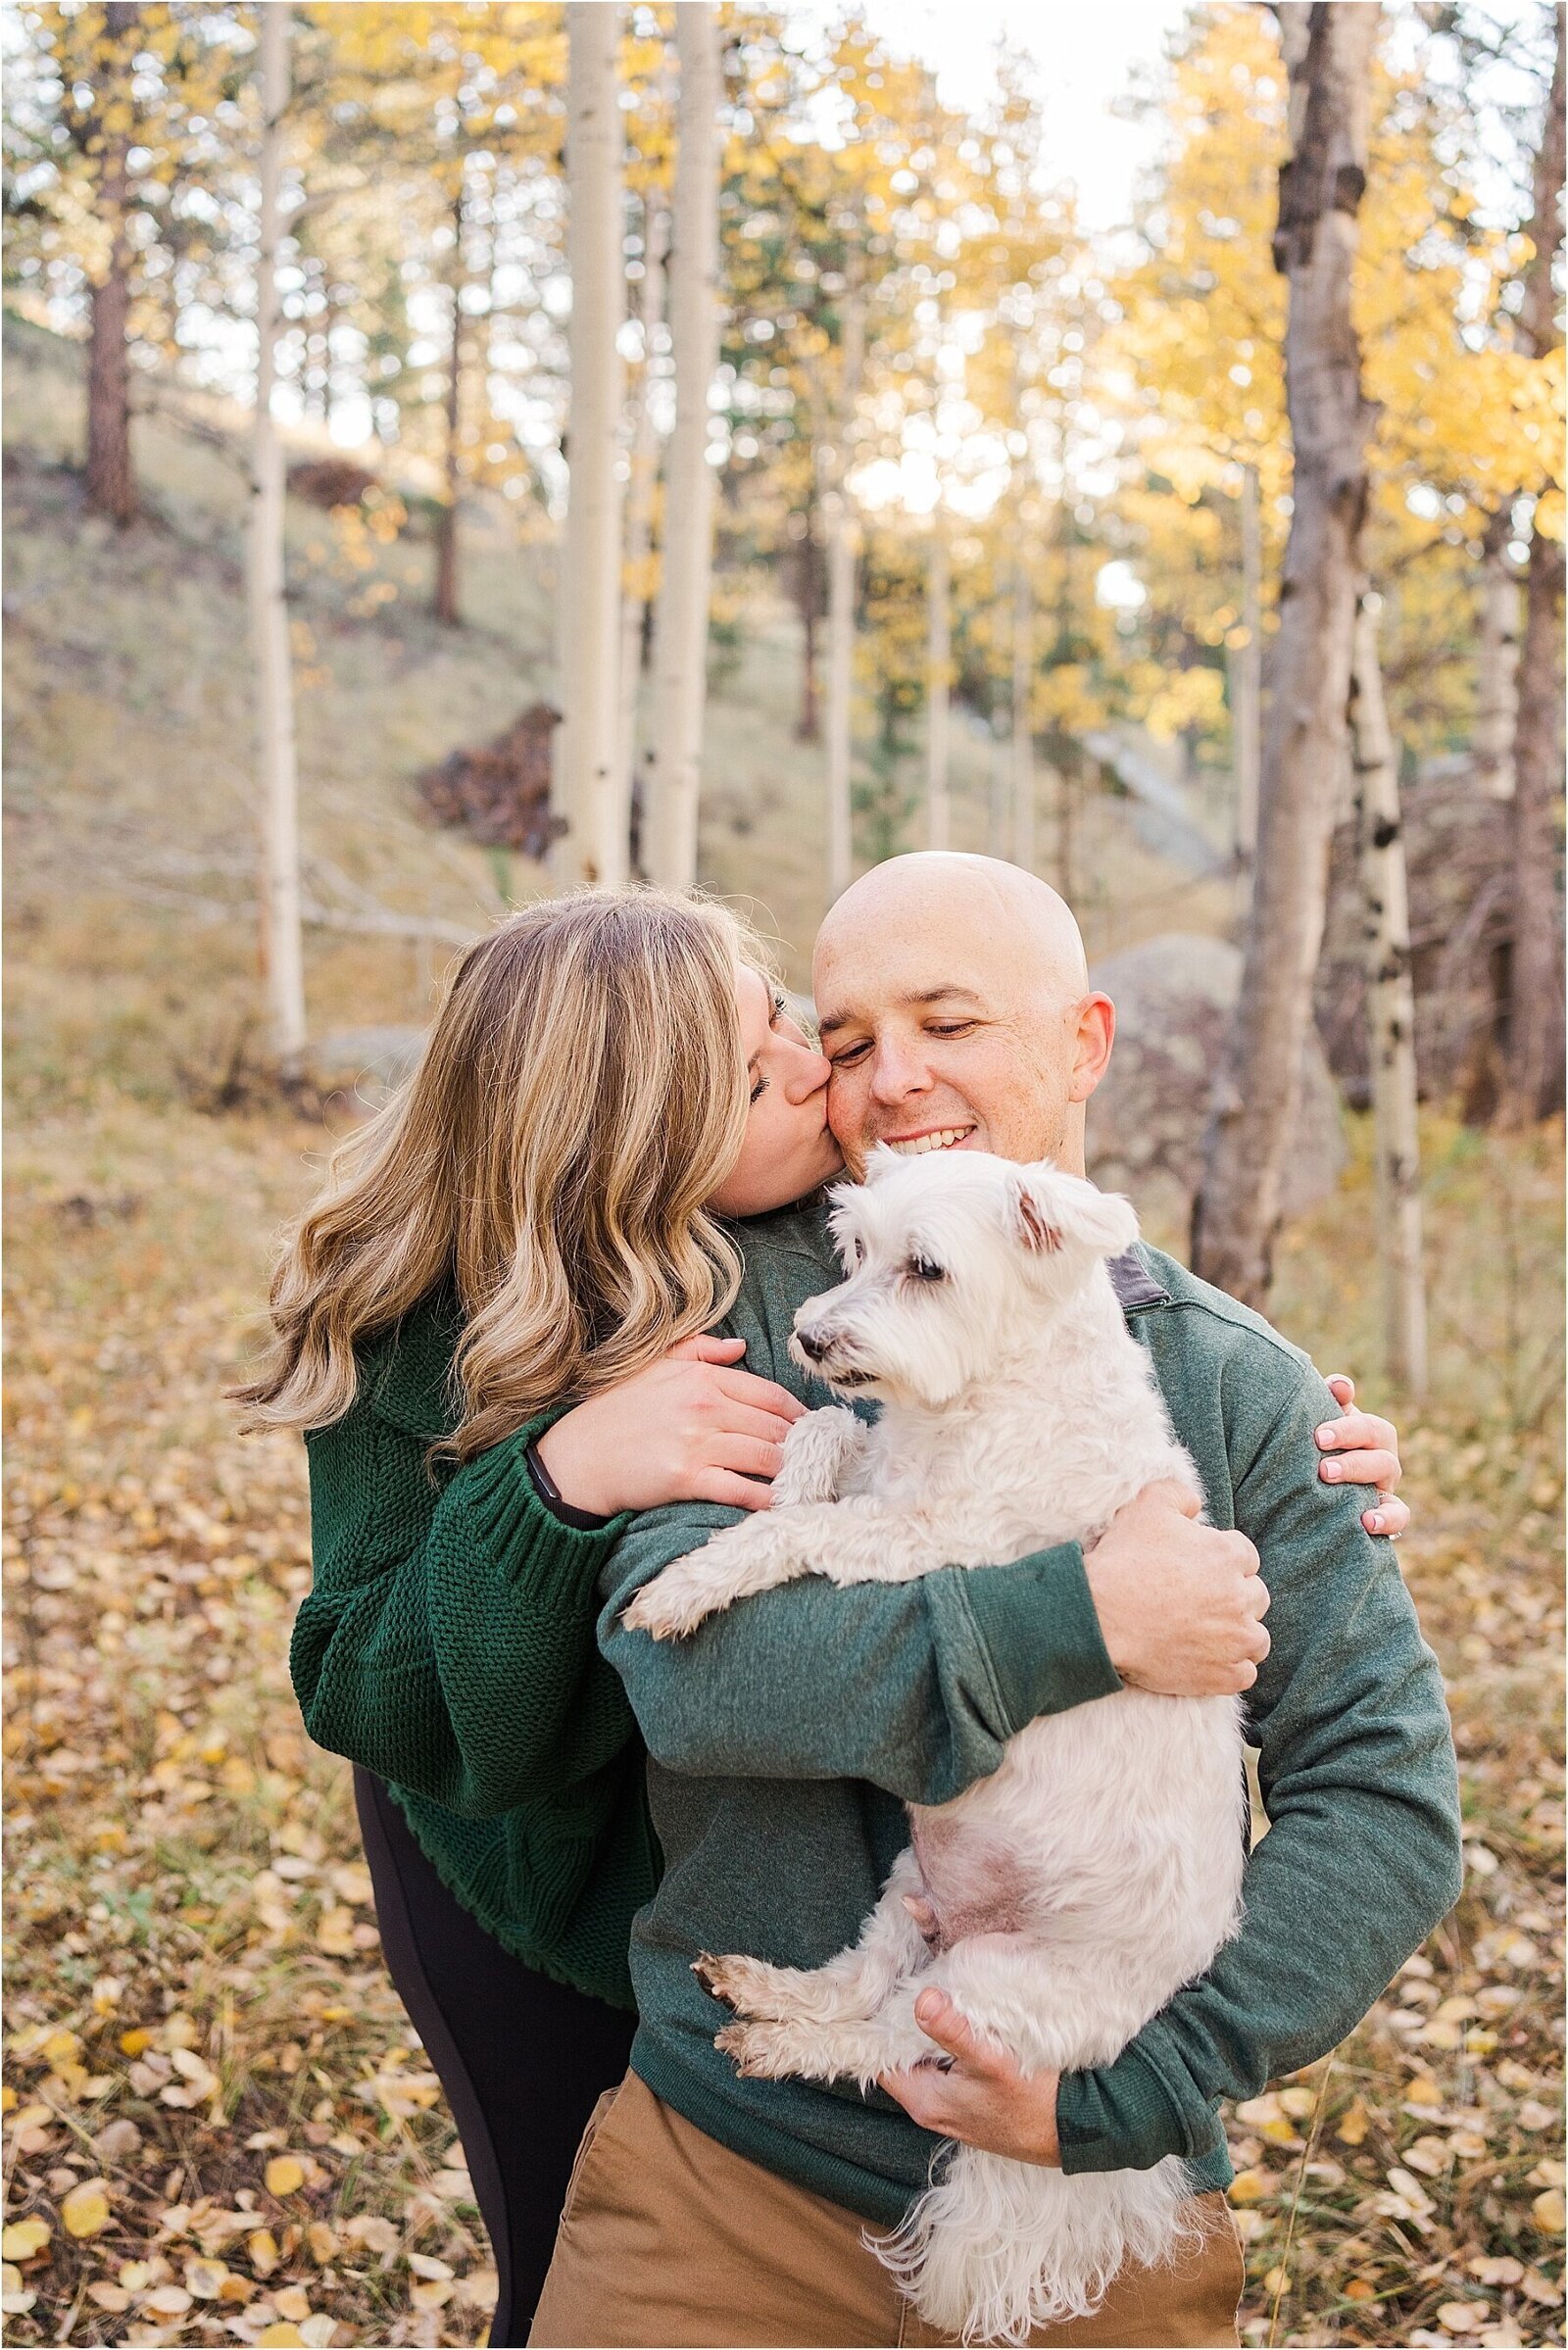 Let Sam Immer Photography tell your unique love story through a documentary-style engagement session. With natural light and the stunning Rocky Mountains as your backdrop, your session will be a true reflection of your adventurous spirit.